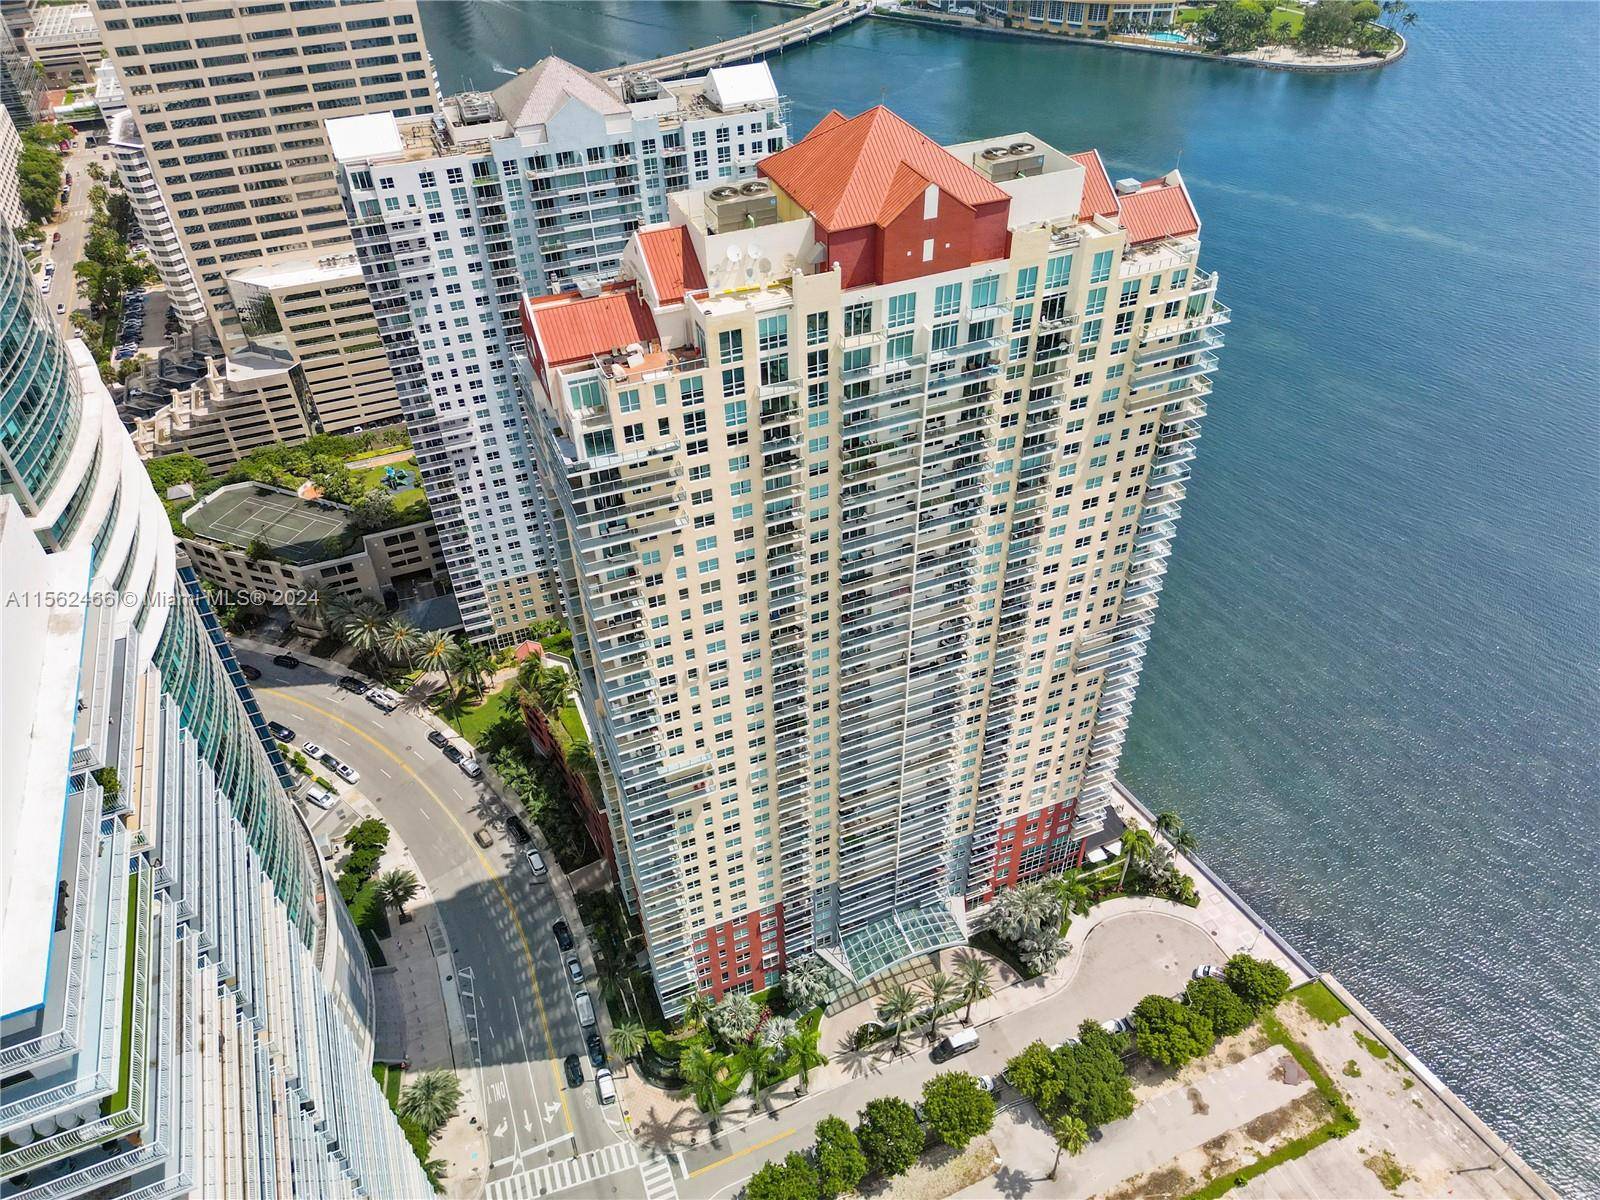 Penthouse corner unit at The Mark in Brickell.